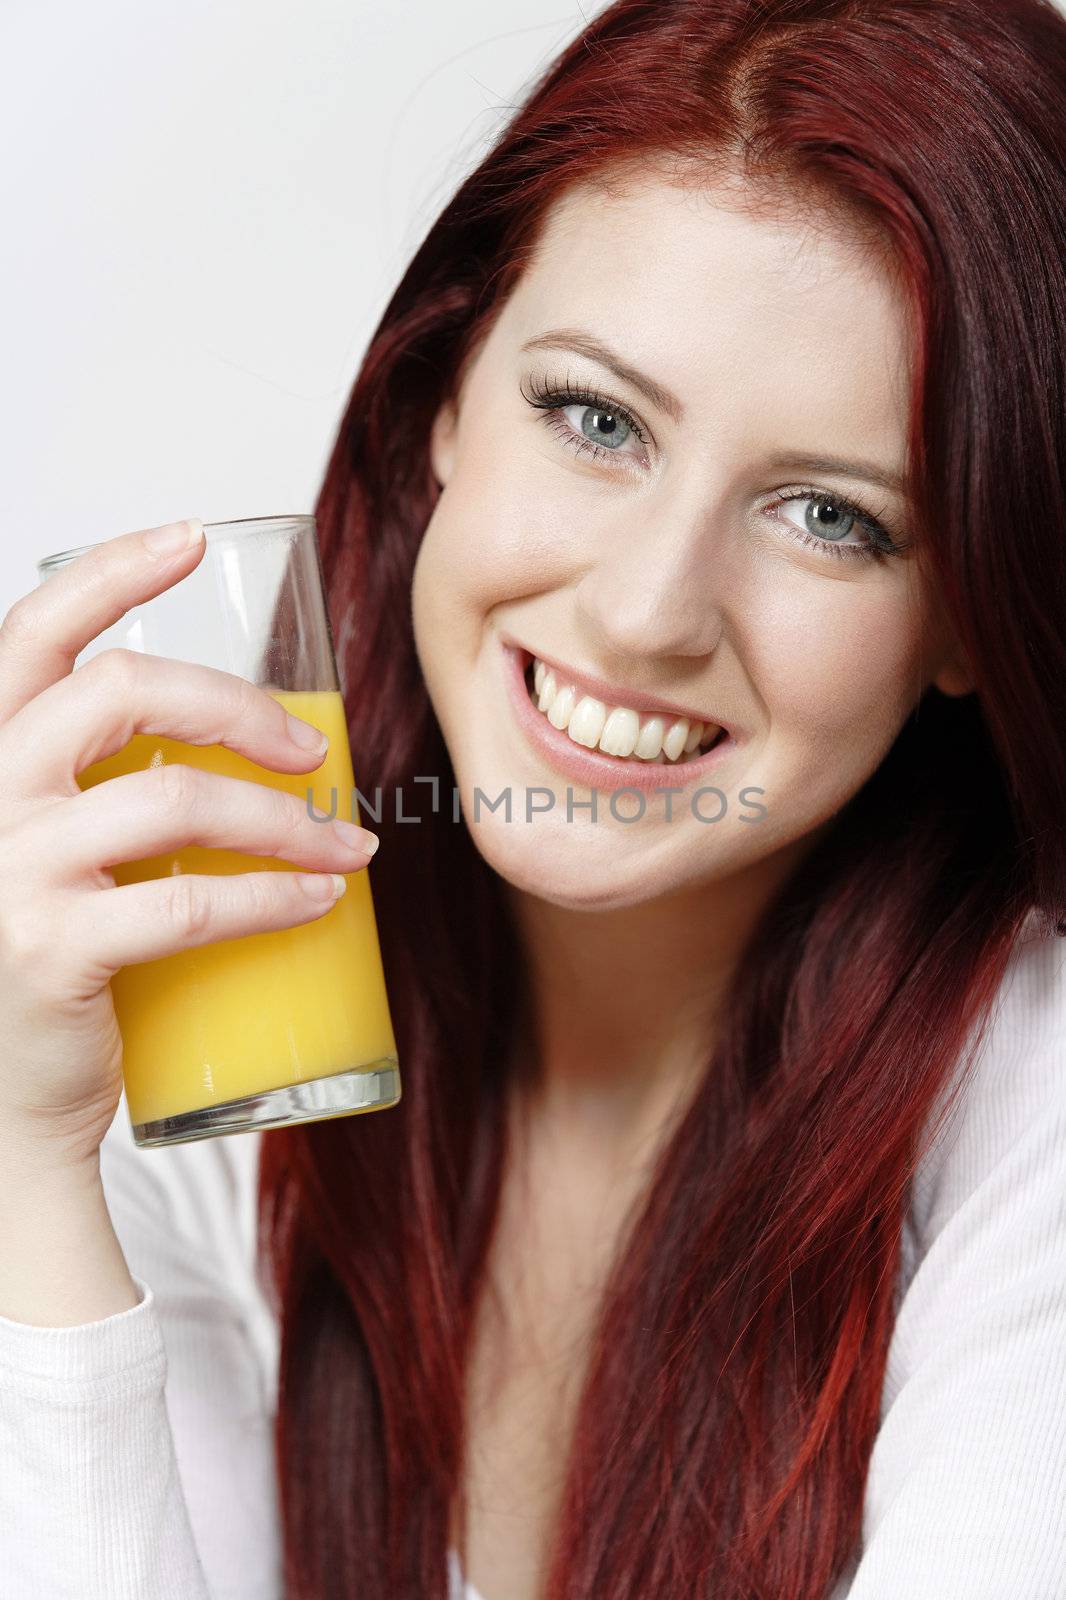 Smiling happy young woman with a fresh glass of Orange juice during breakfast.